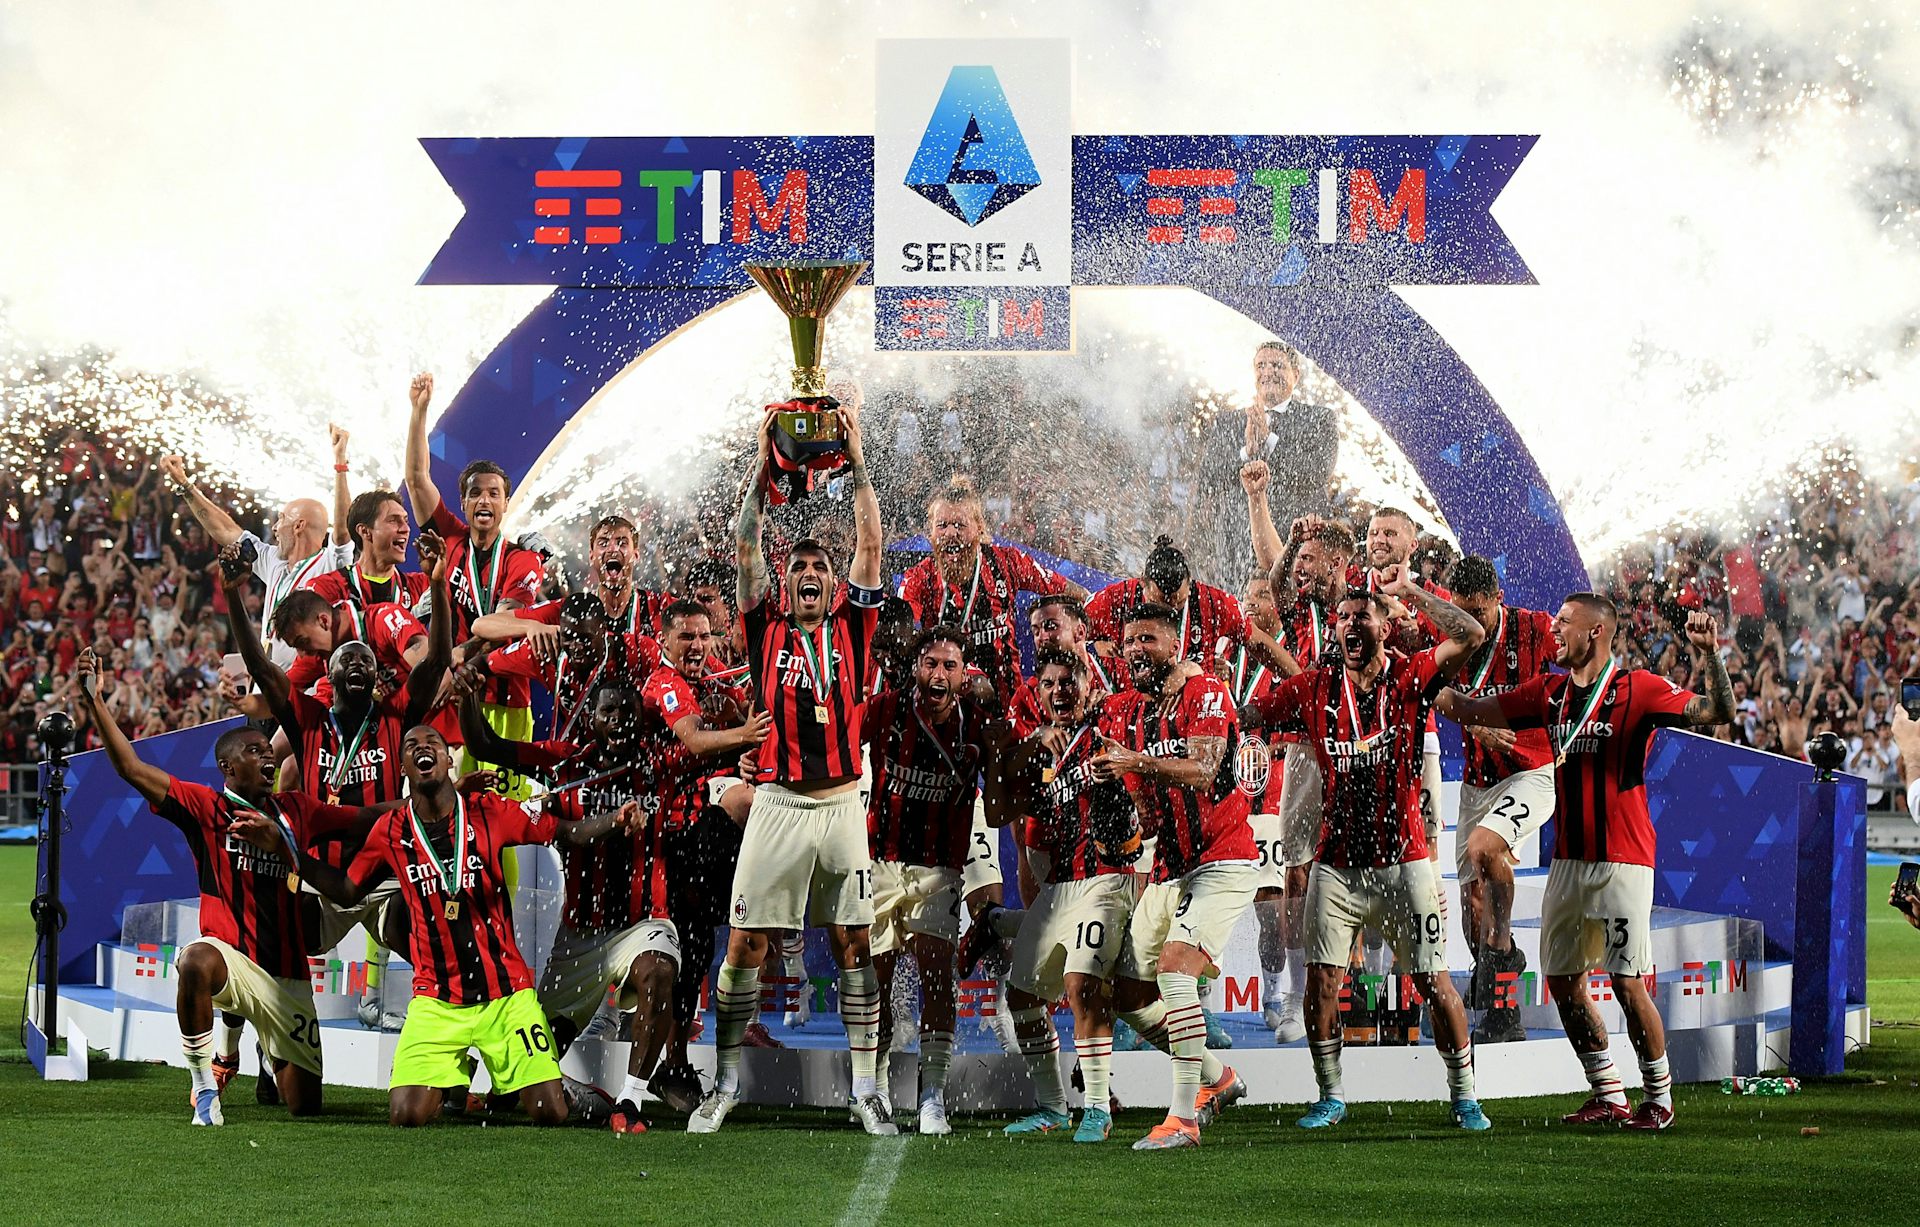 AC Milan Serie A win carries lessons in team building, mentorship and organisation